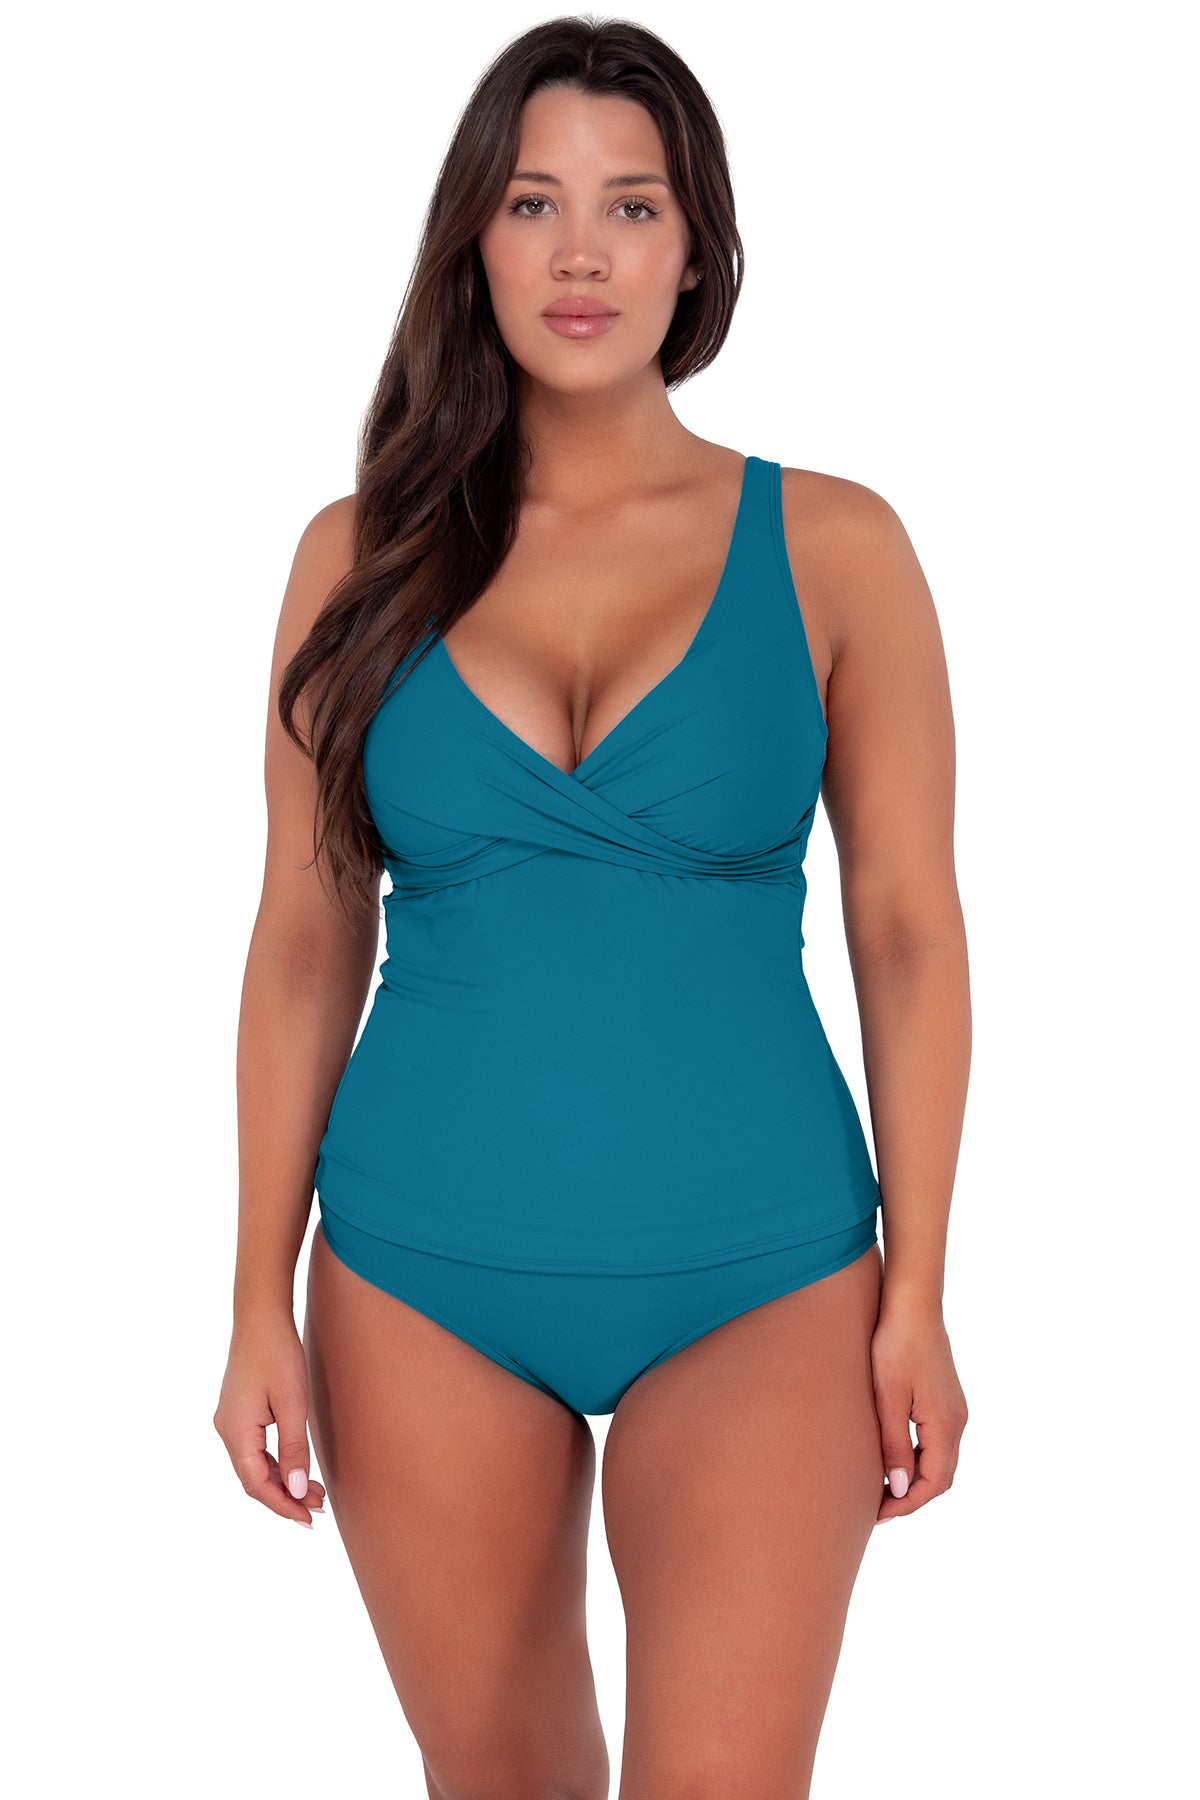 Front pose #1 of Nicki wearing Sunsets Avalon Teal Elsie Tankini Top paired with Hannah High Waist bikini bottom